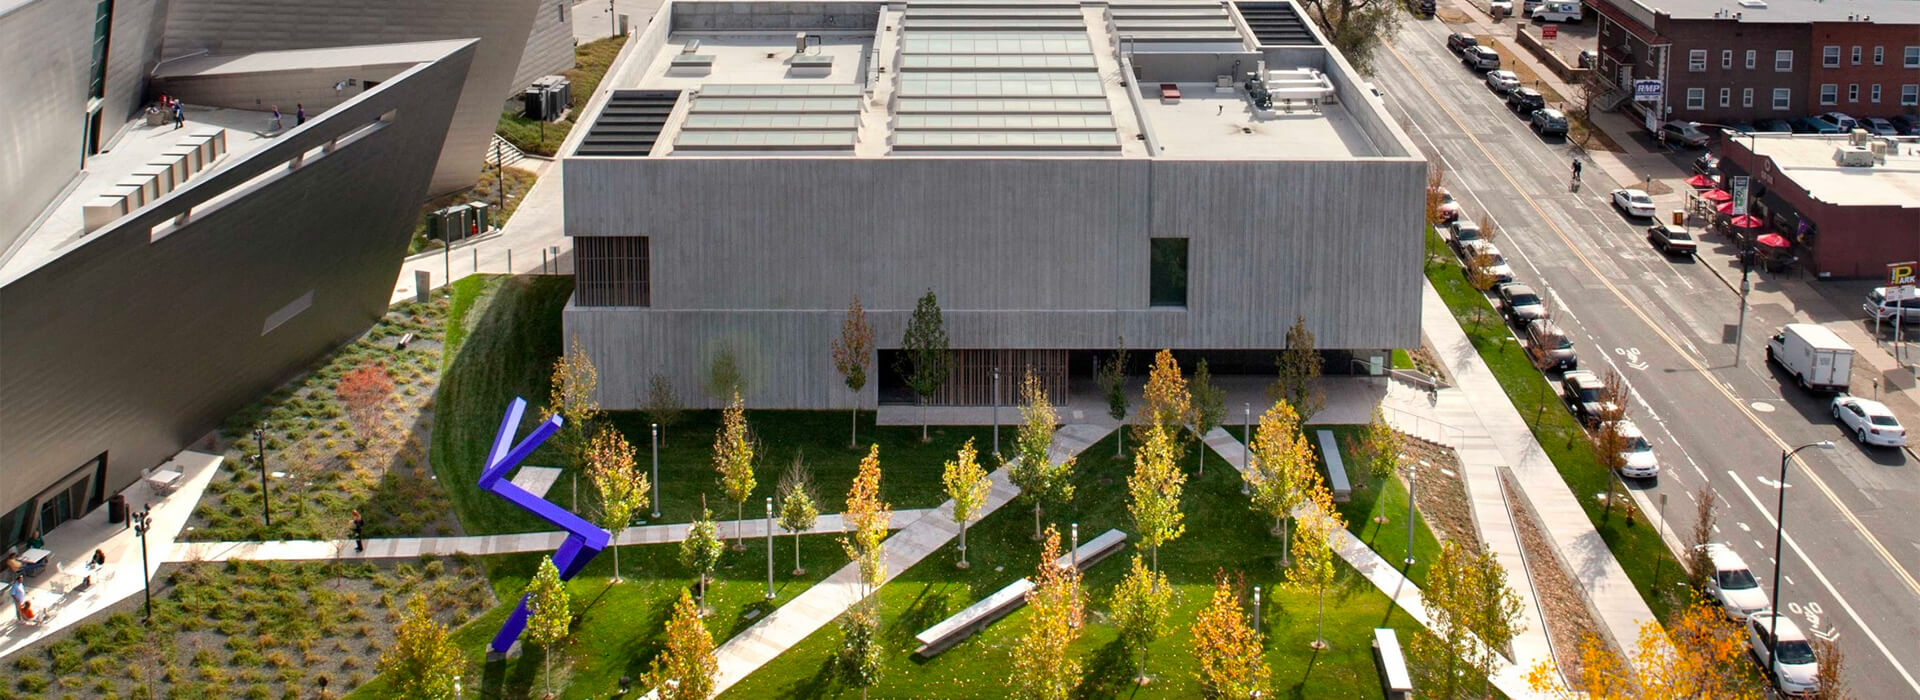 Aerial view of the Clyfford Still Museum and forecourt